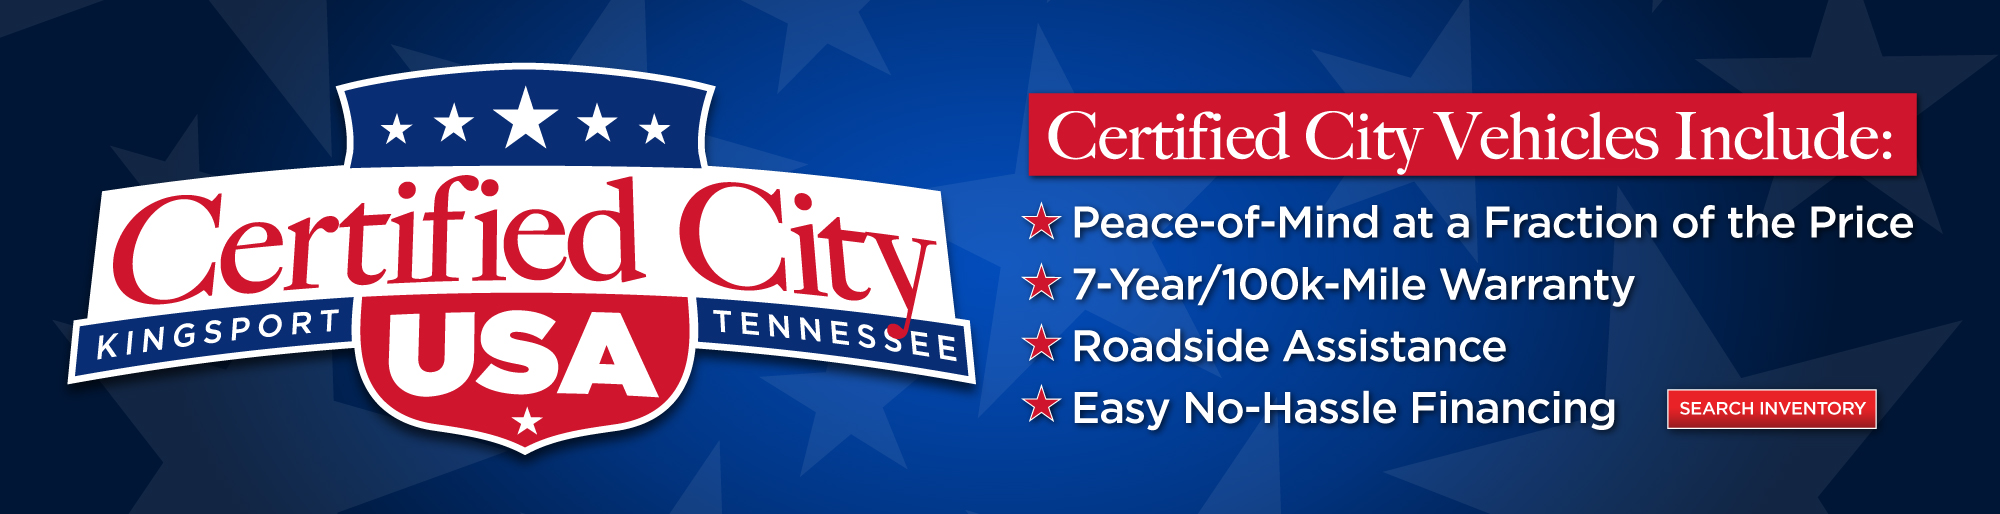 Certified City Vehicles in Kingsport, TN